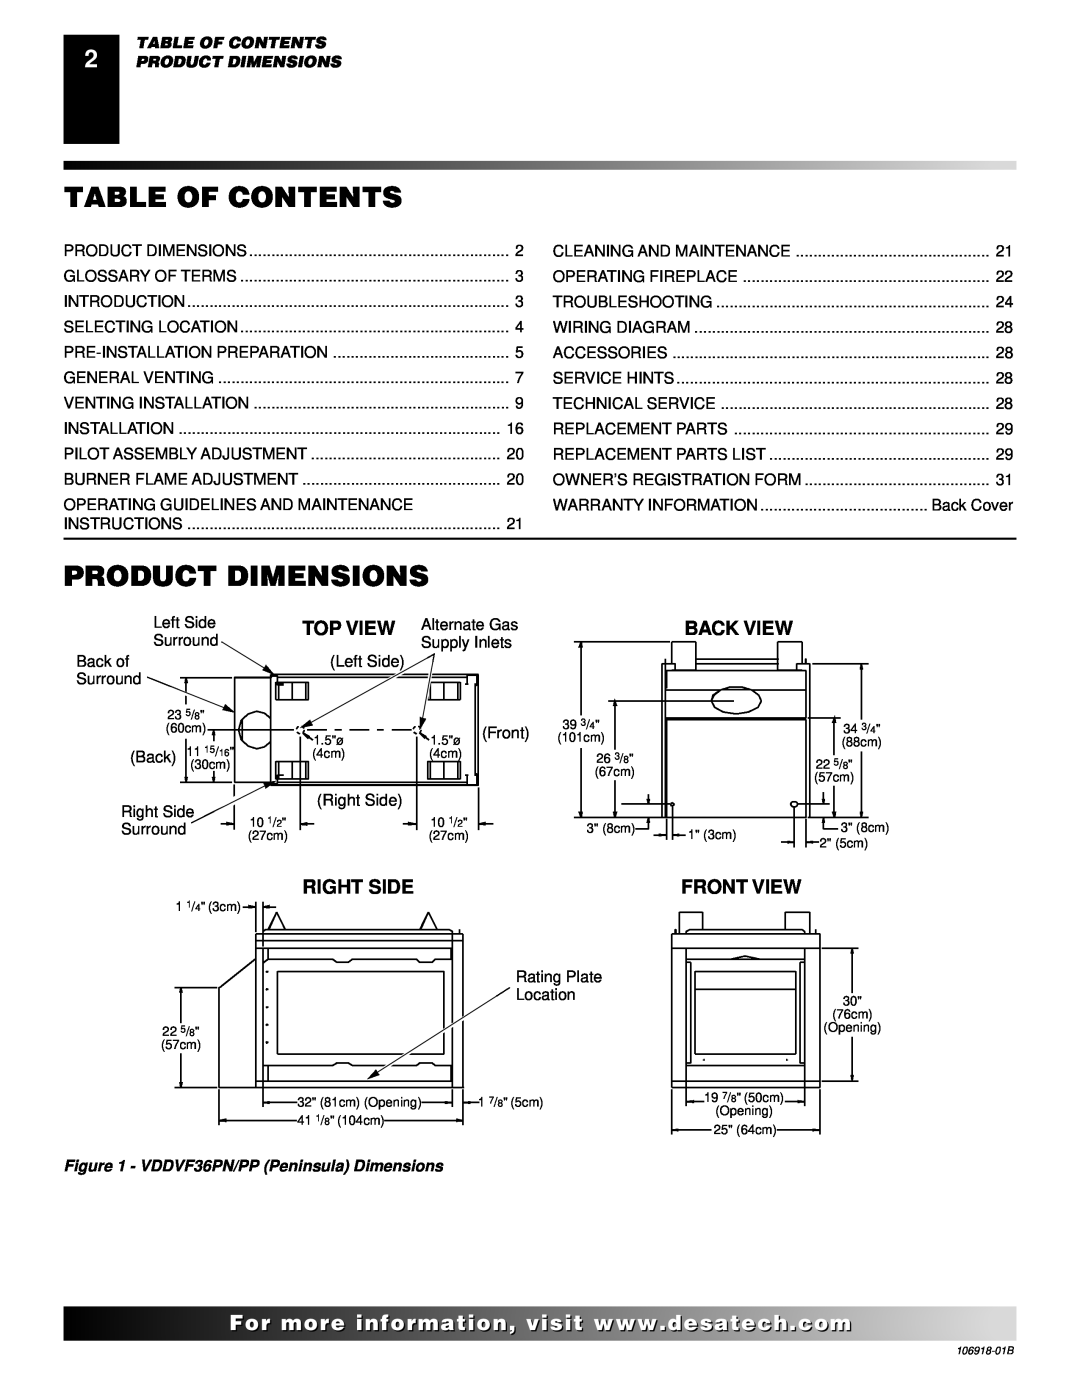 Desa VDDVF36PN/PP, VDDVF36STN/STP Table Of Contents, Product Dimensions, Back View, Right Side, Front View 